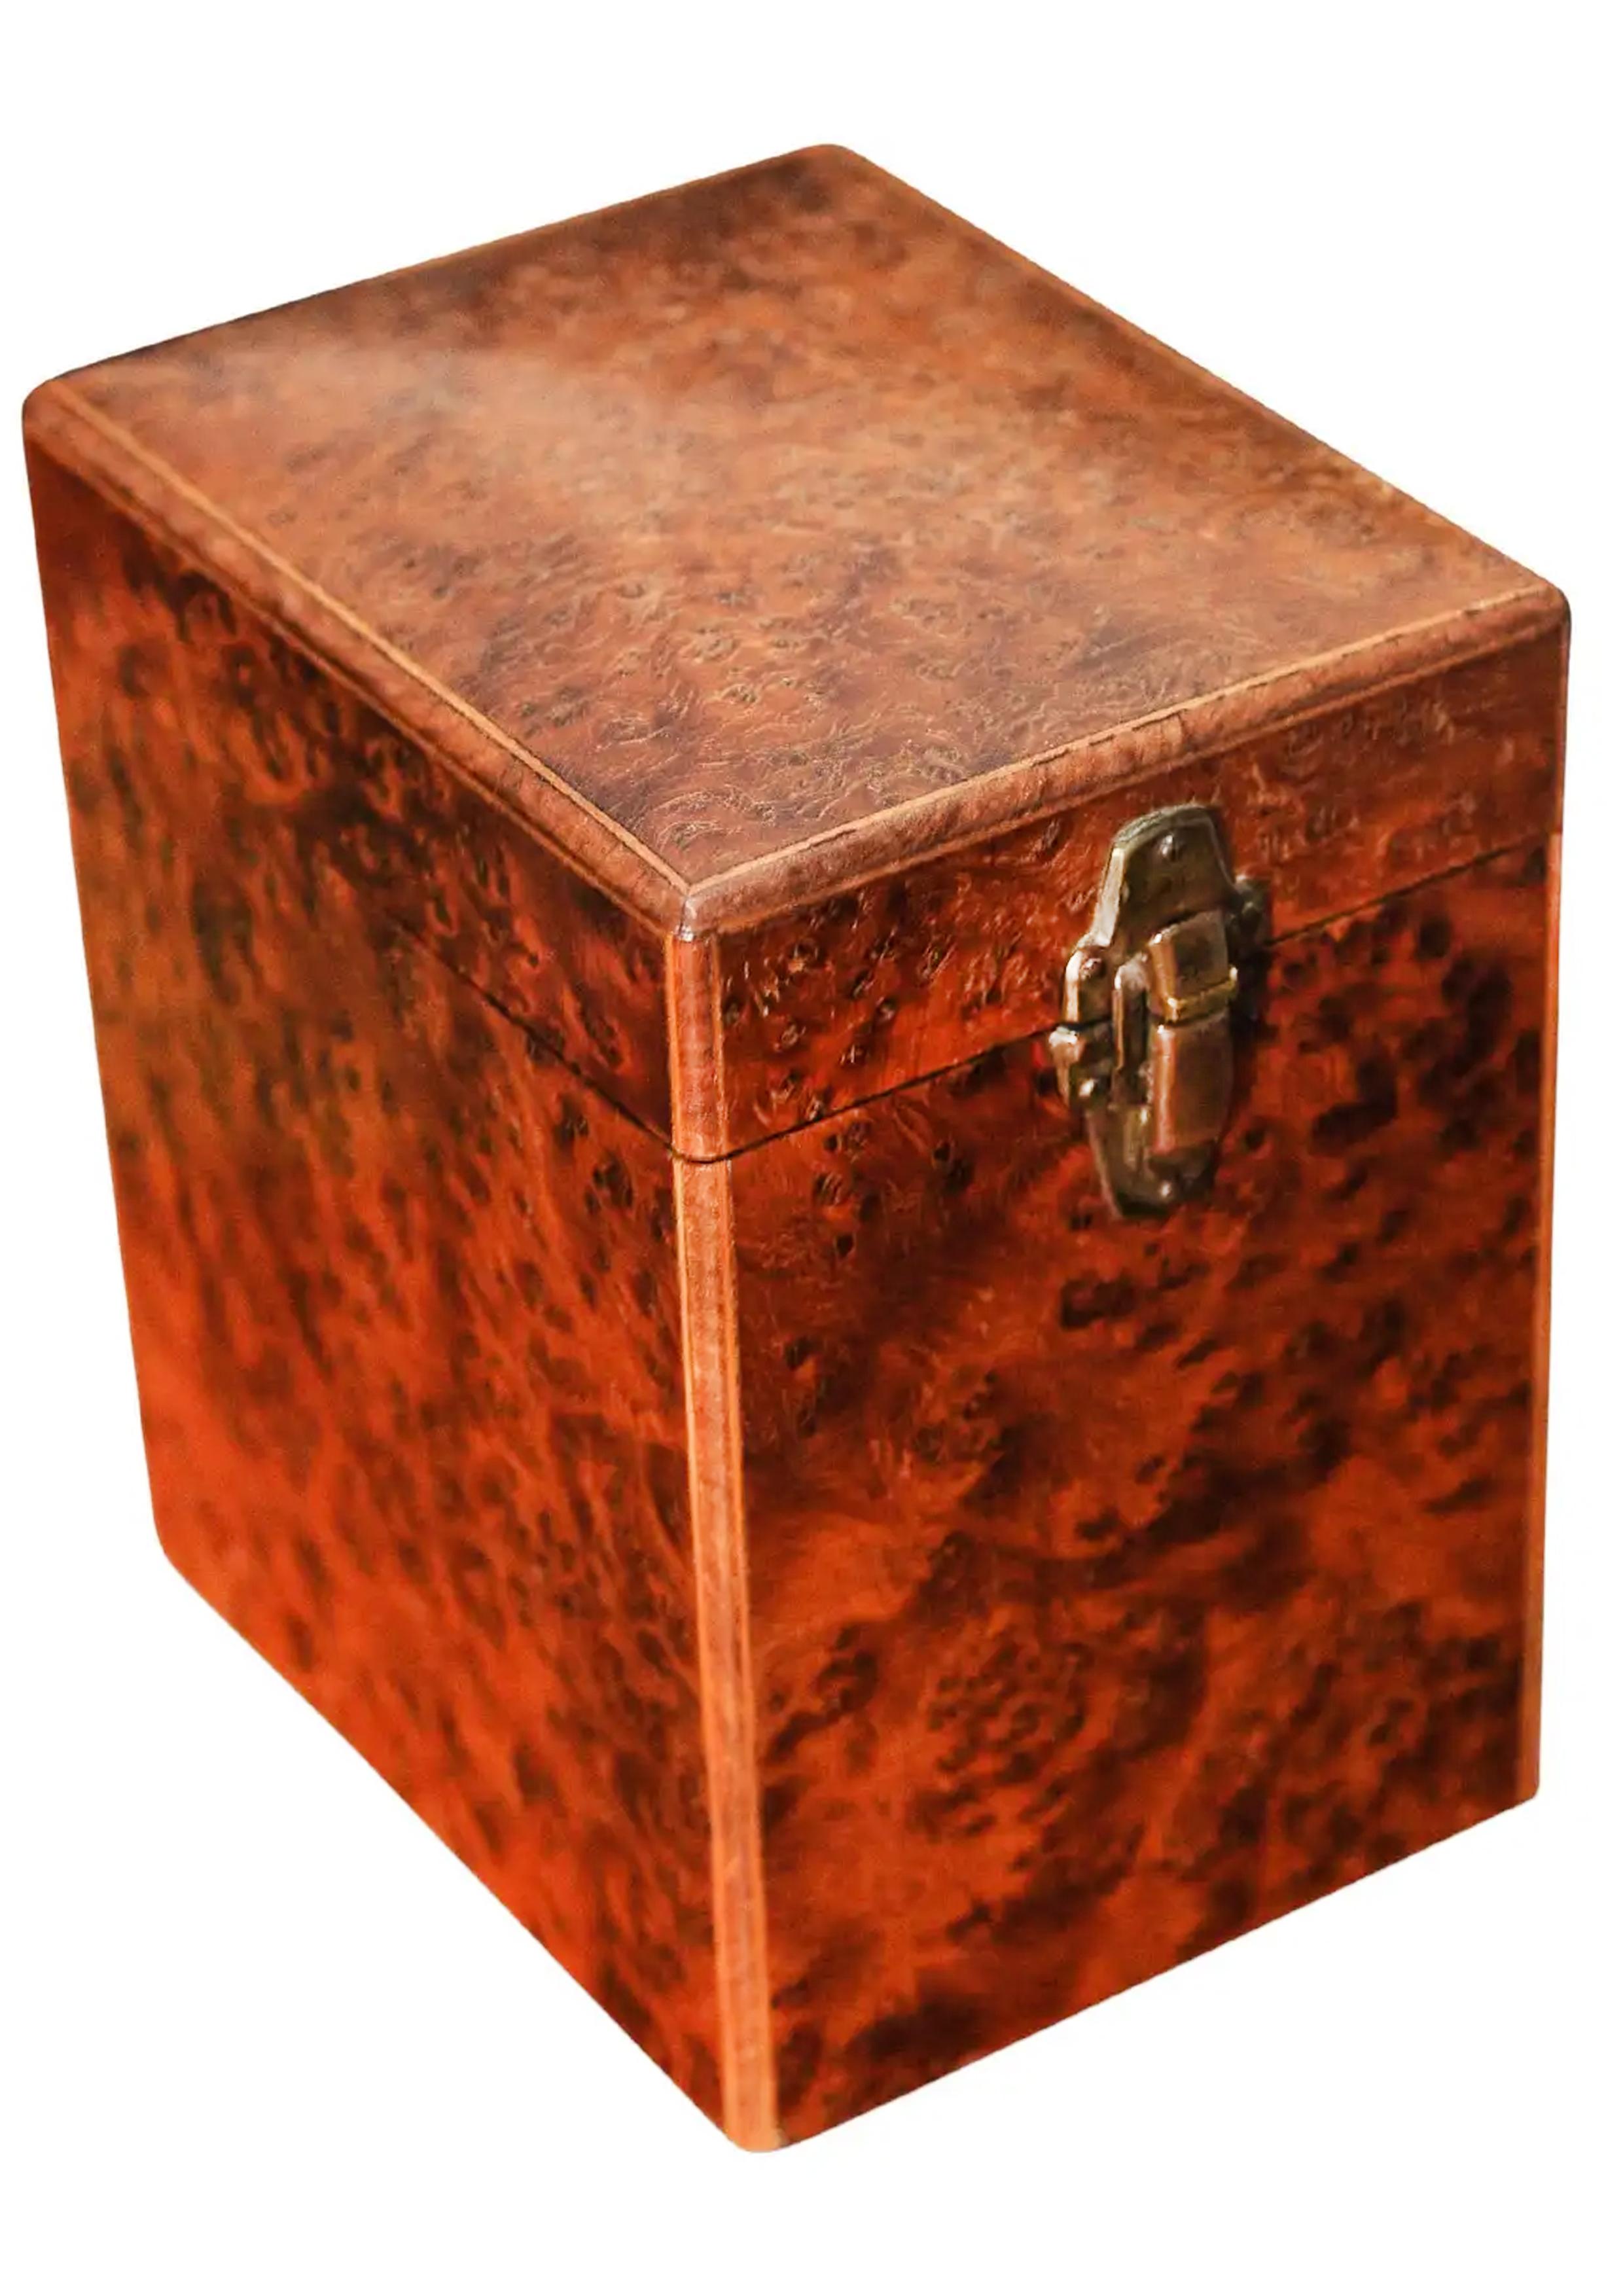 Handmade Victorian Burr Walnut & Inlay Tea Caddy With Brass Hinges In Good Condition For Sale In High Wycombe, GB